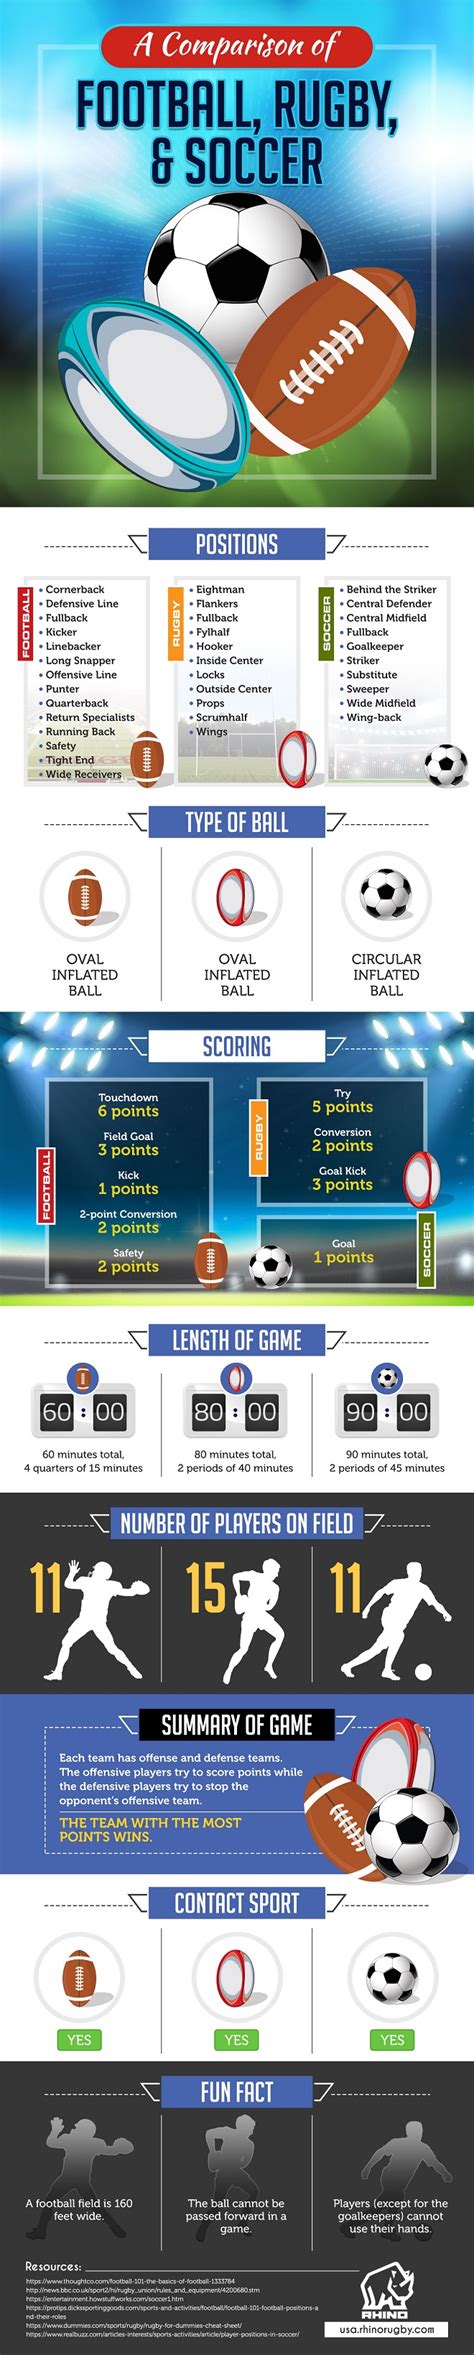 Football Rugby And Soccer Comparison Infographic Follr